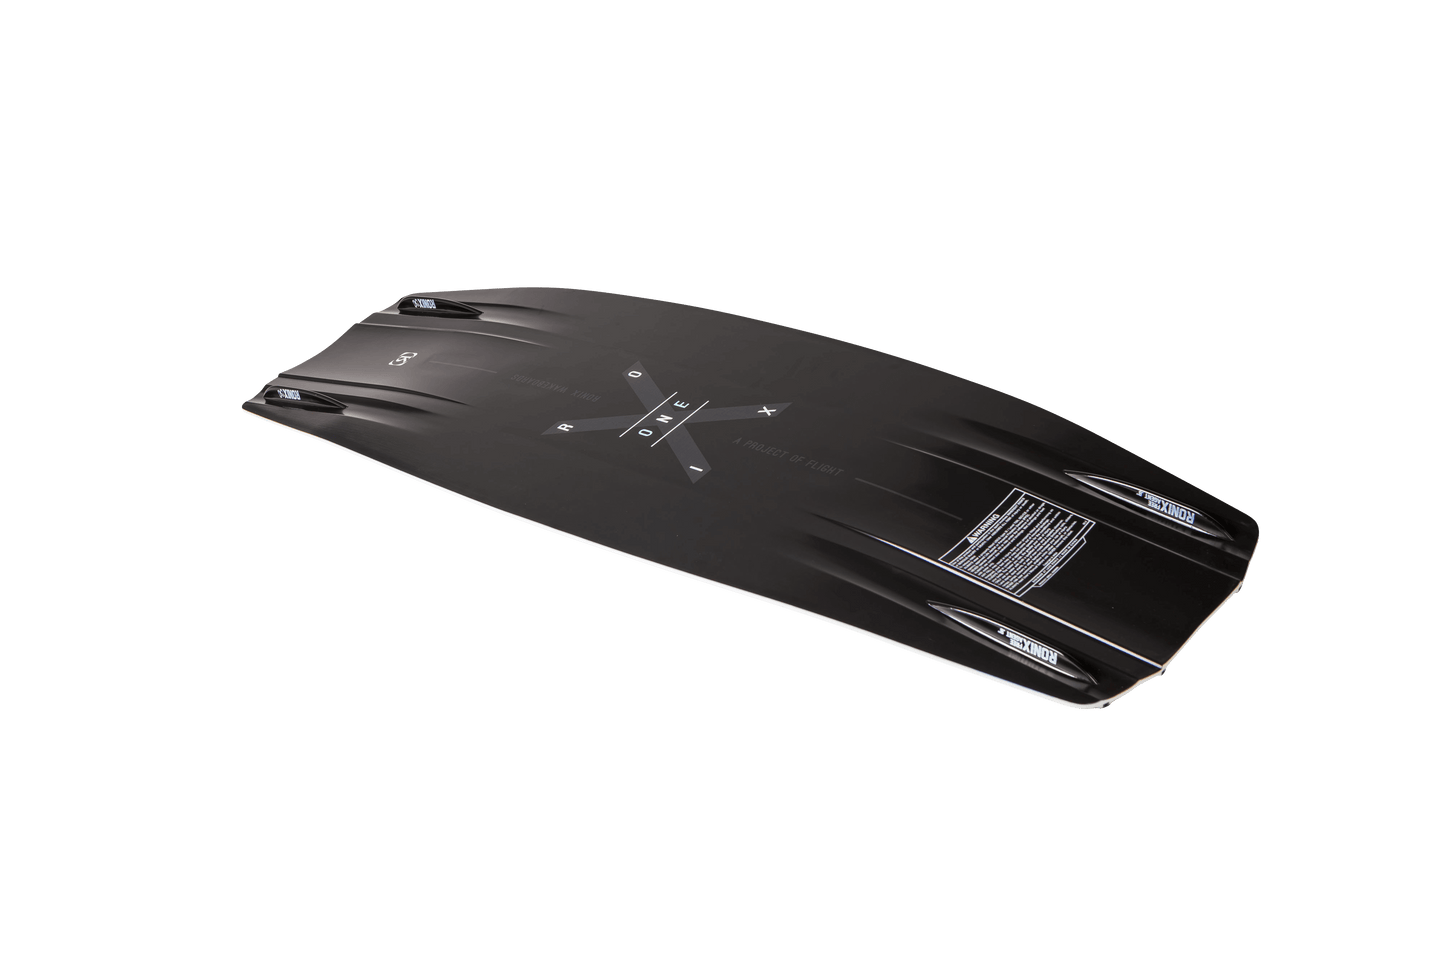 One - Timebomb Fused Core Wakeboard